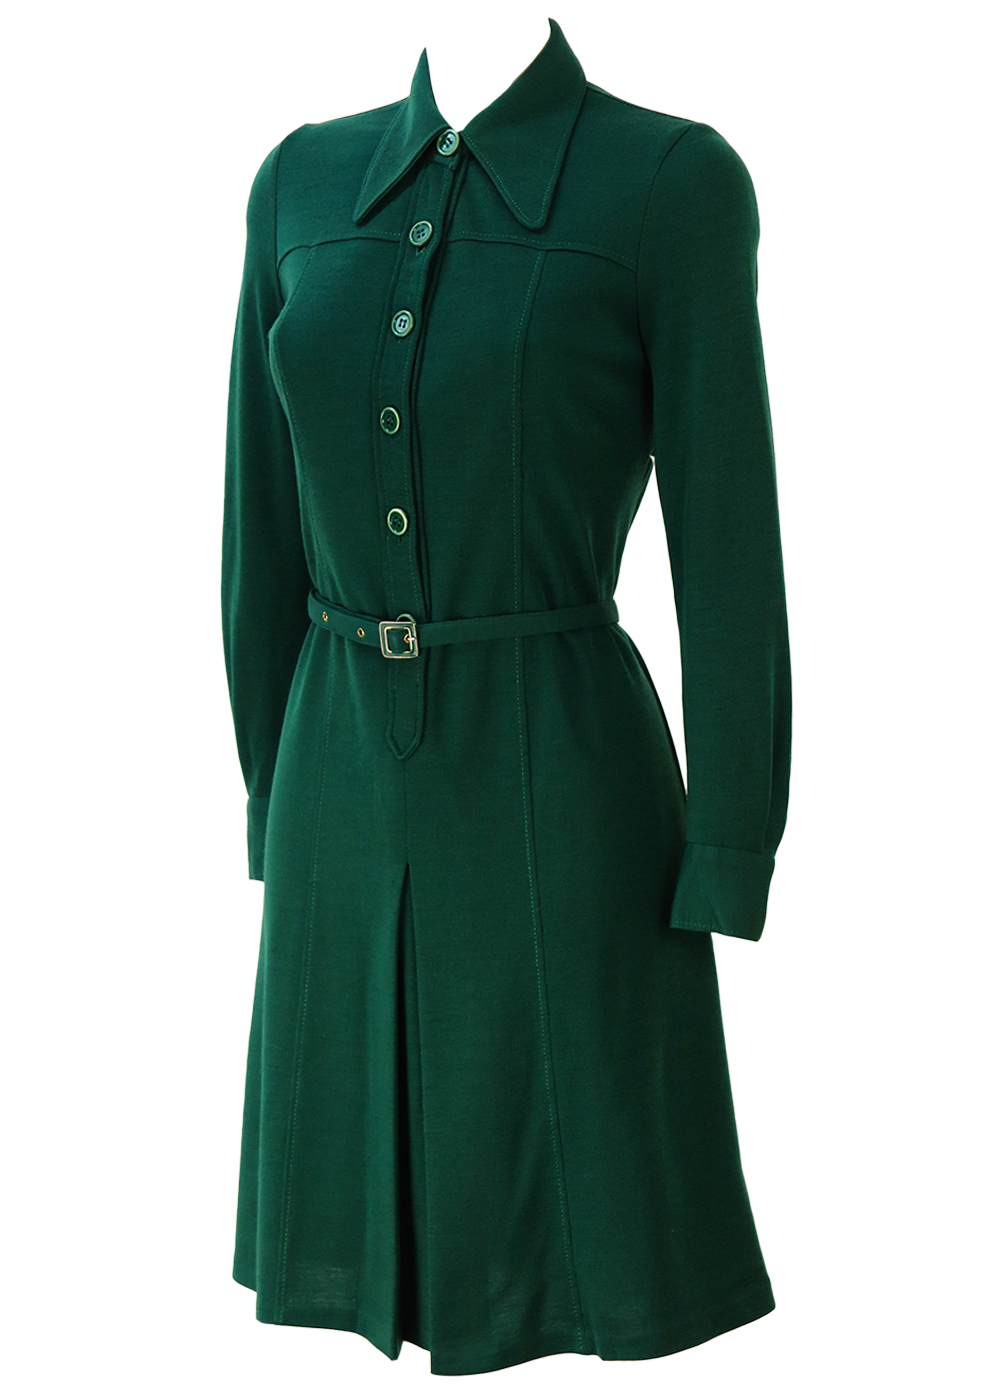 Vintage 60’s Green Long Sleeved Button Front Jersey Midi Dress – S/M